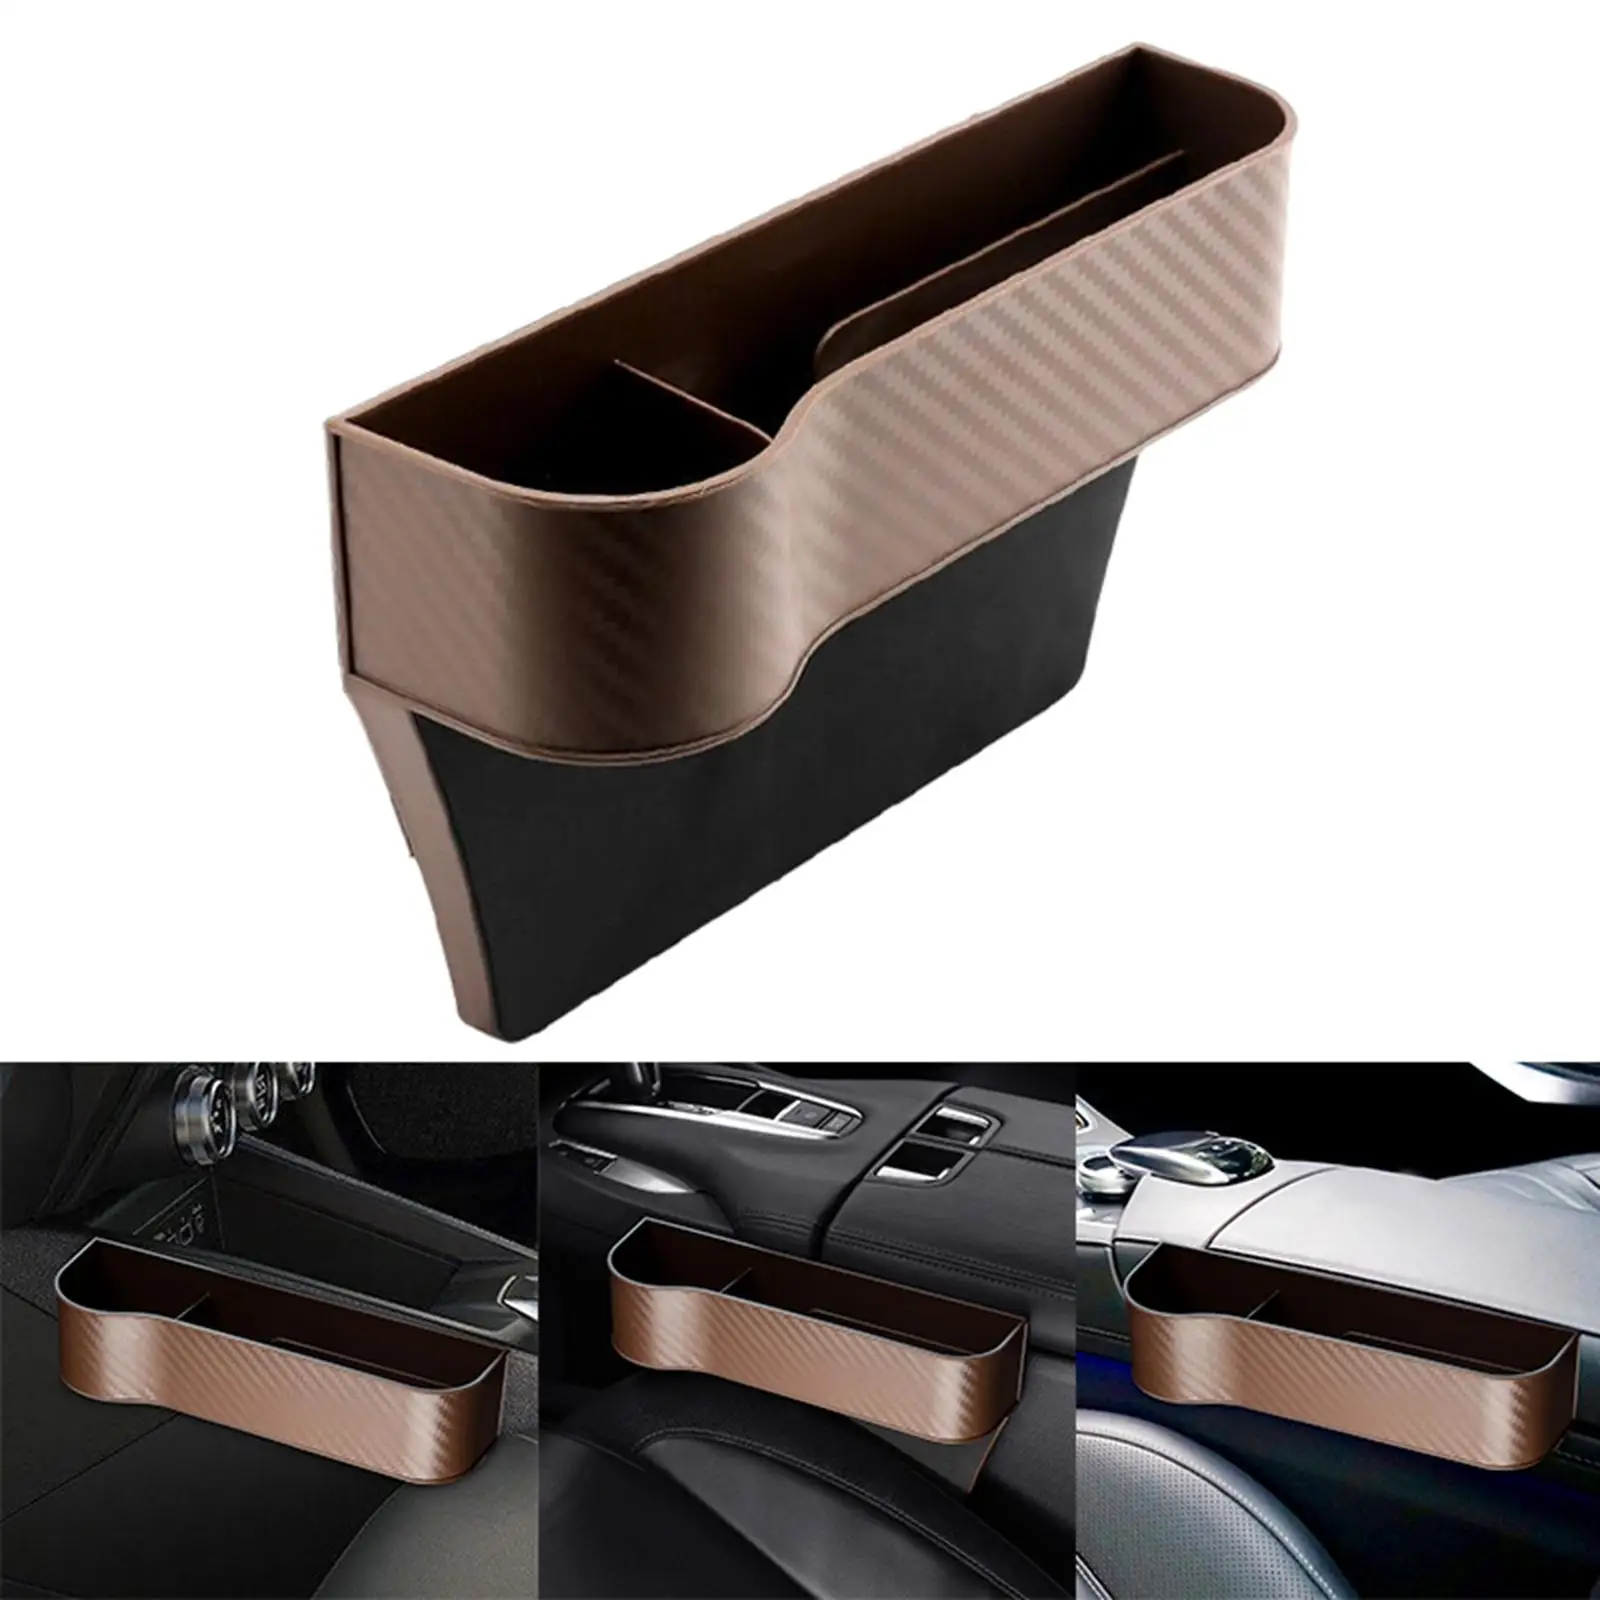 Car Front Seat Gap Organizer Premium Multifunctions Professional Insert Between The Seat and Console Made of ABS Plastic Durable